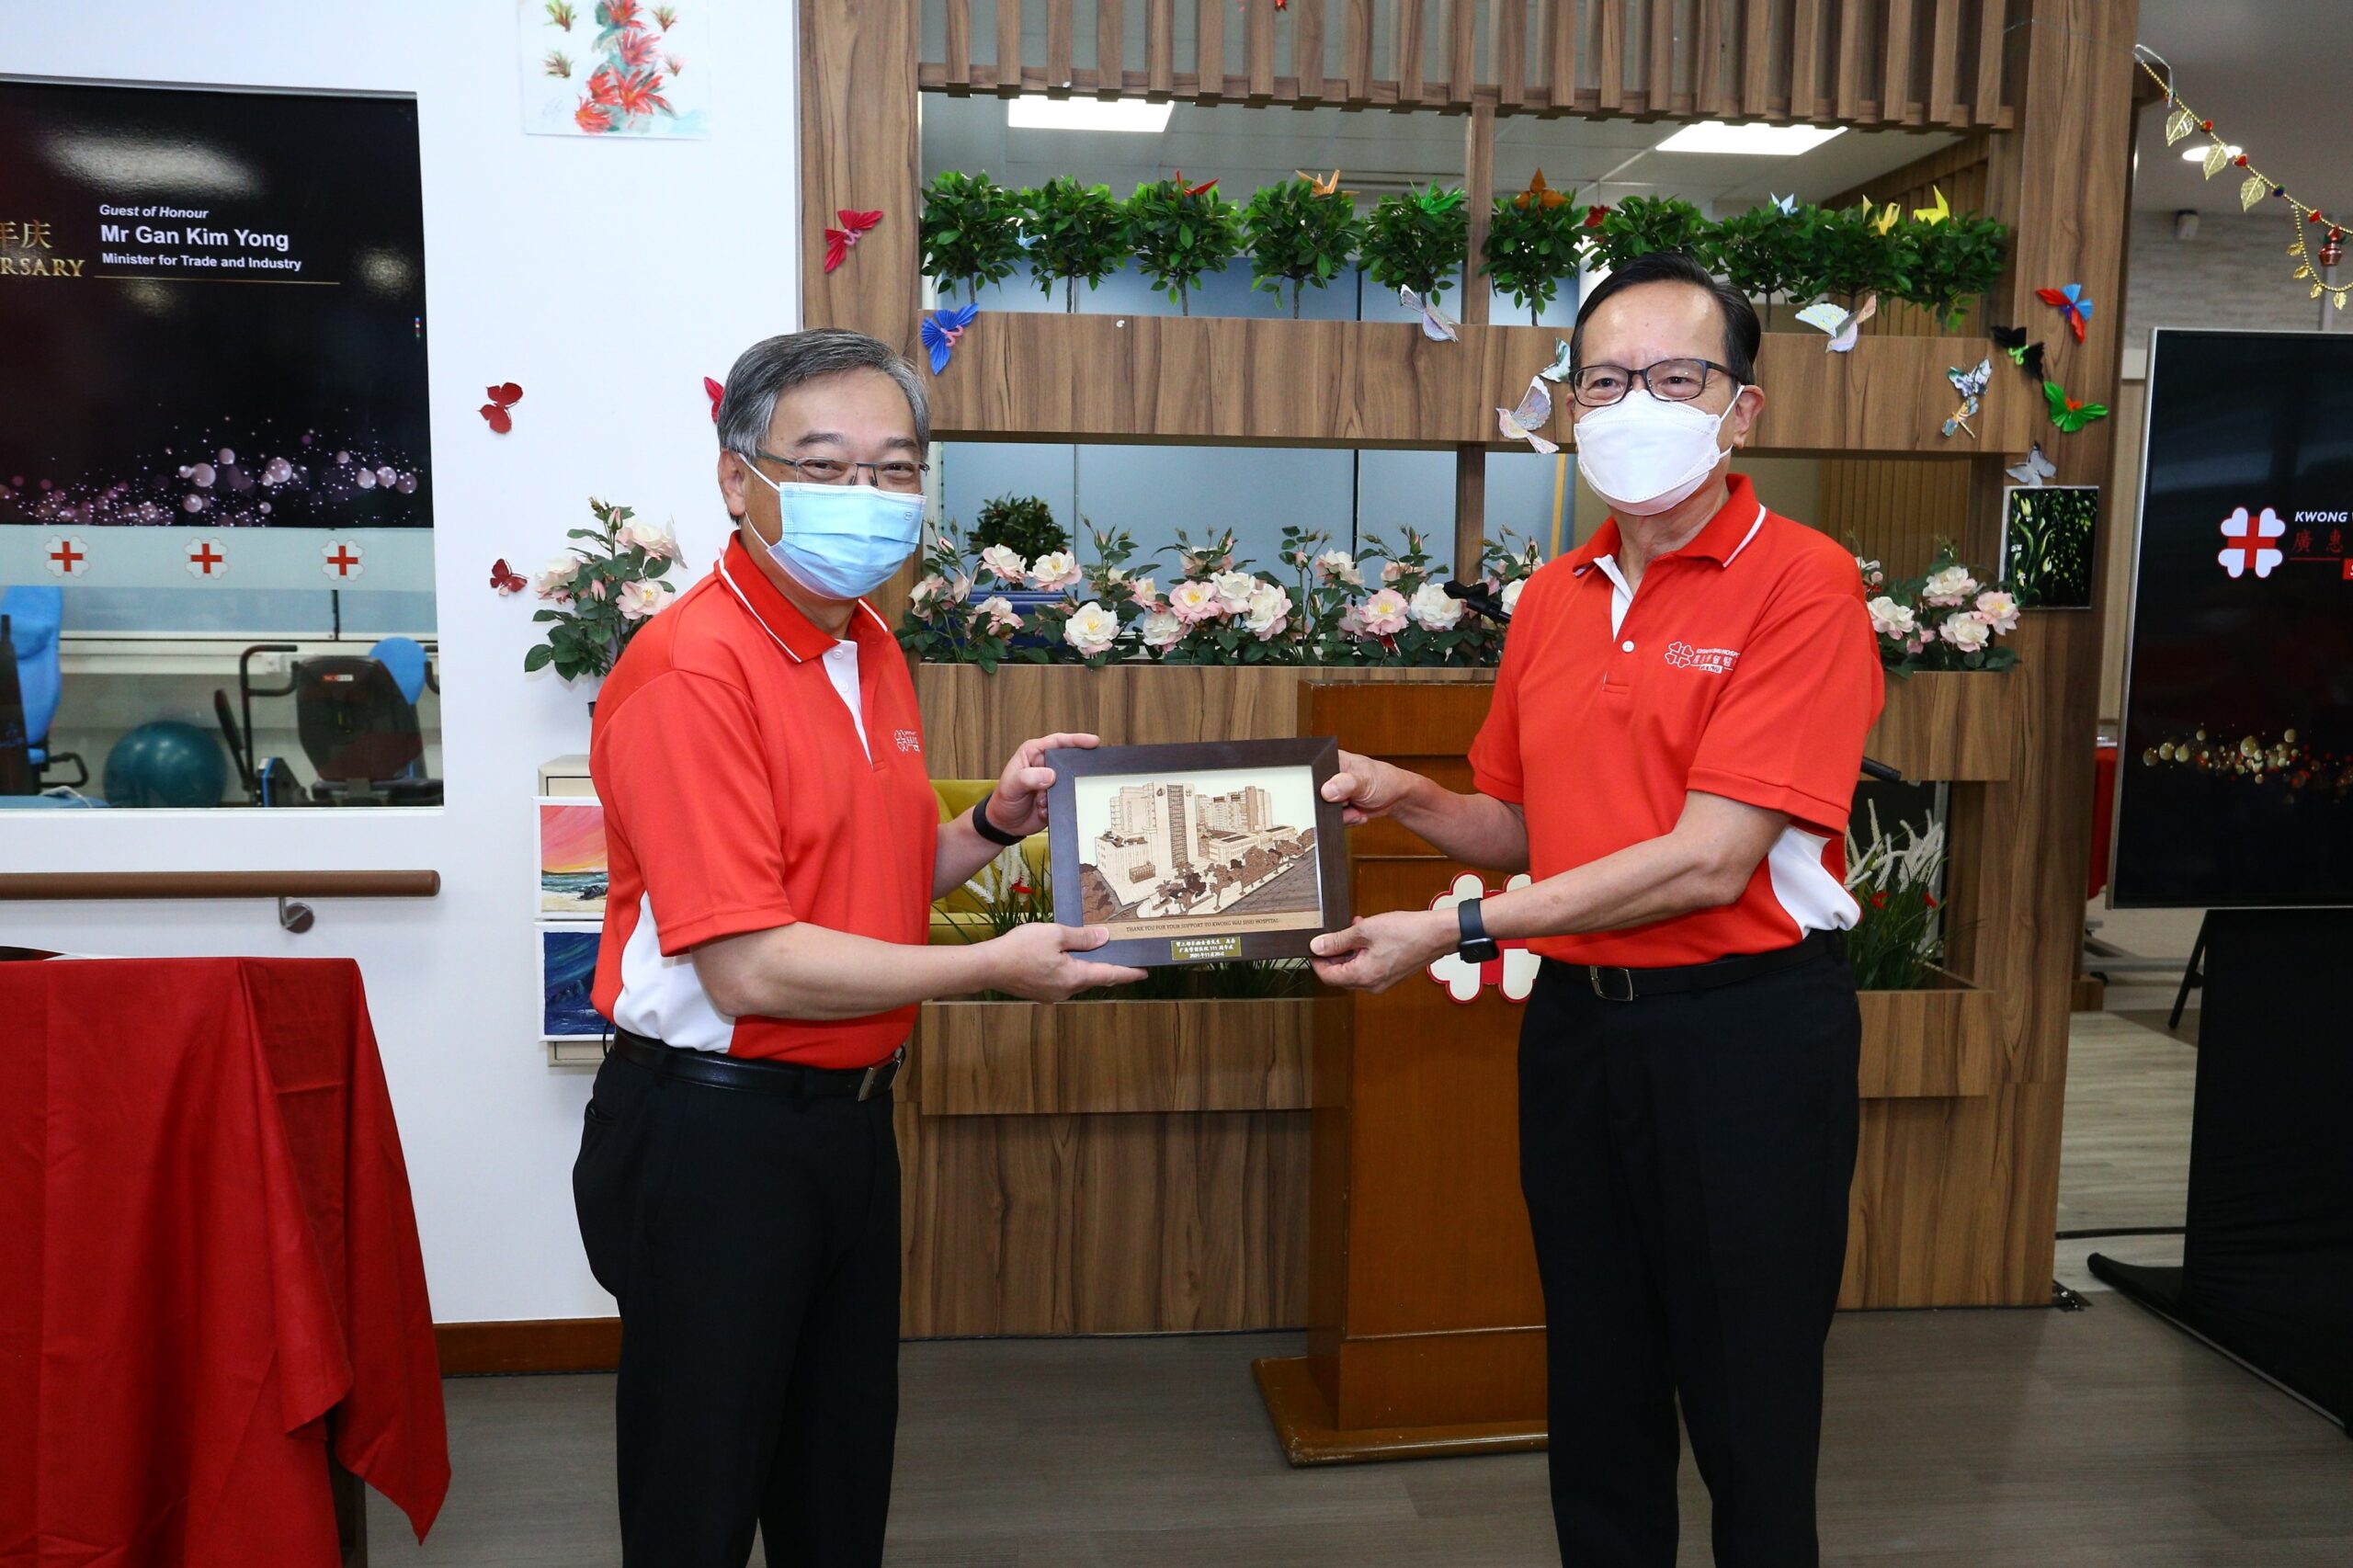 Commemorative Book Launched and New Wards Opened at KWSH 111th Anniversary